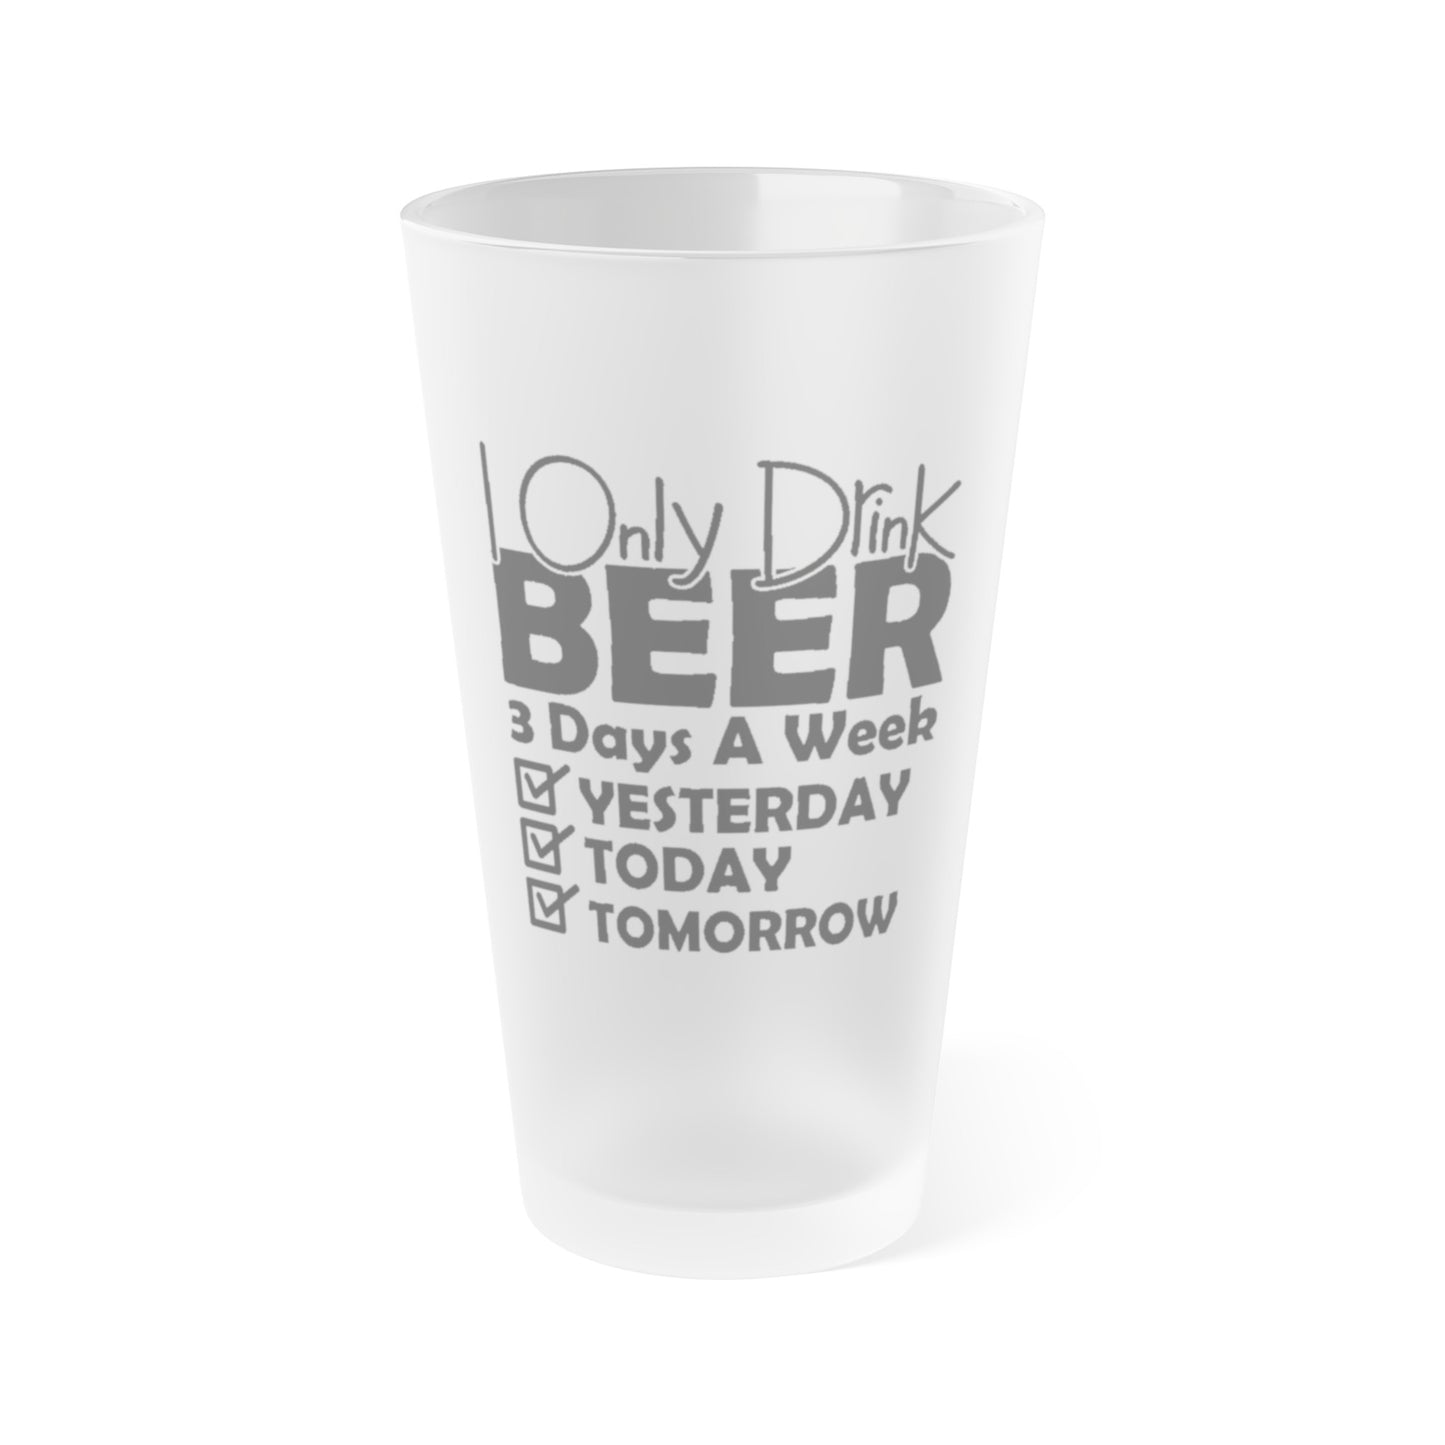 I Only Drink Beer 3 Days A Week - Frosted Pint Glass, 16oz